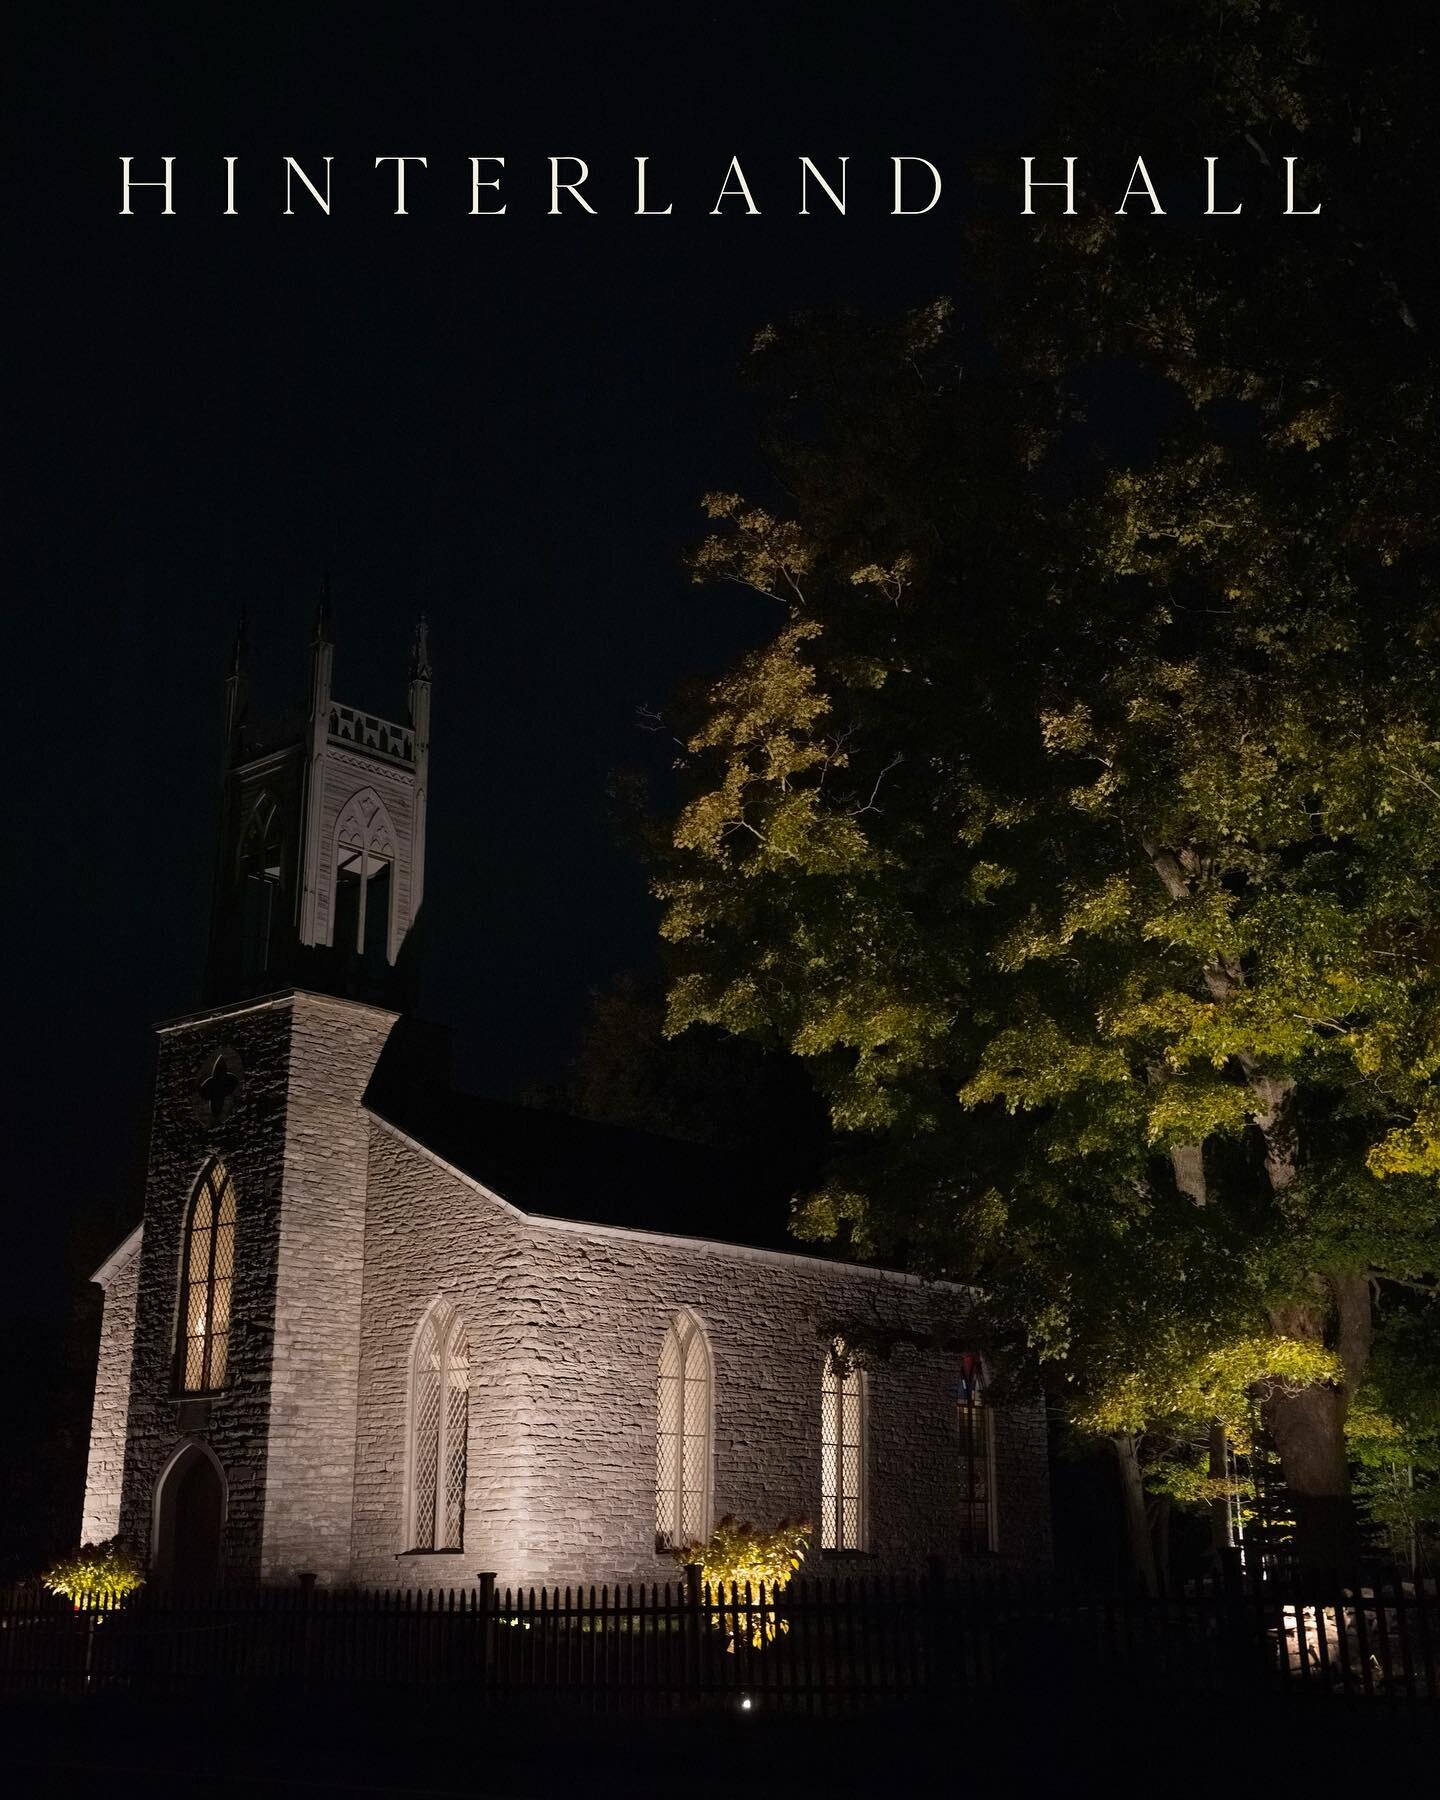 After a long Instagram hiatus, I&rsquo;m excited to announce the opening of @hinterlandhall 

In the summer of 2020 on a scenic drive near our farm @mason_hill_farm , my wife @jane_lowe_photo and I discovered that the St. Luke&rsquo;s Episcopal Paris